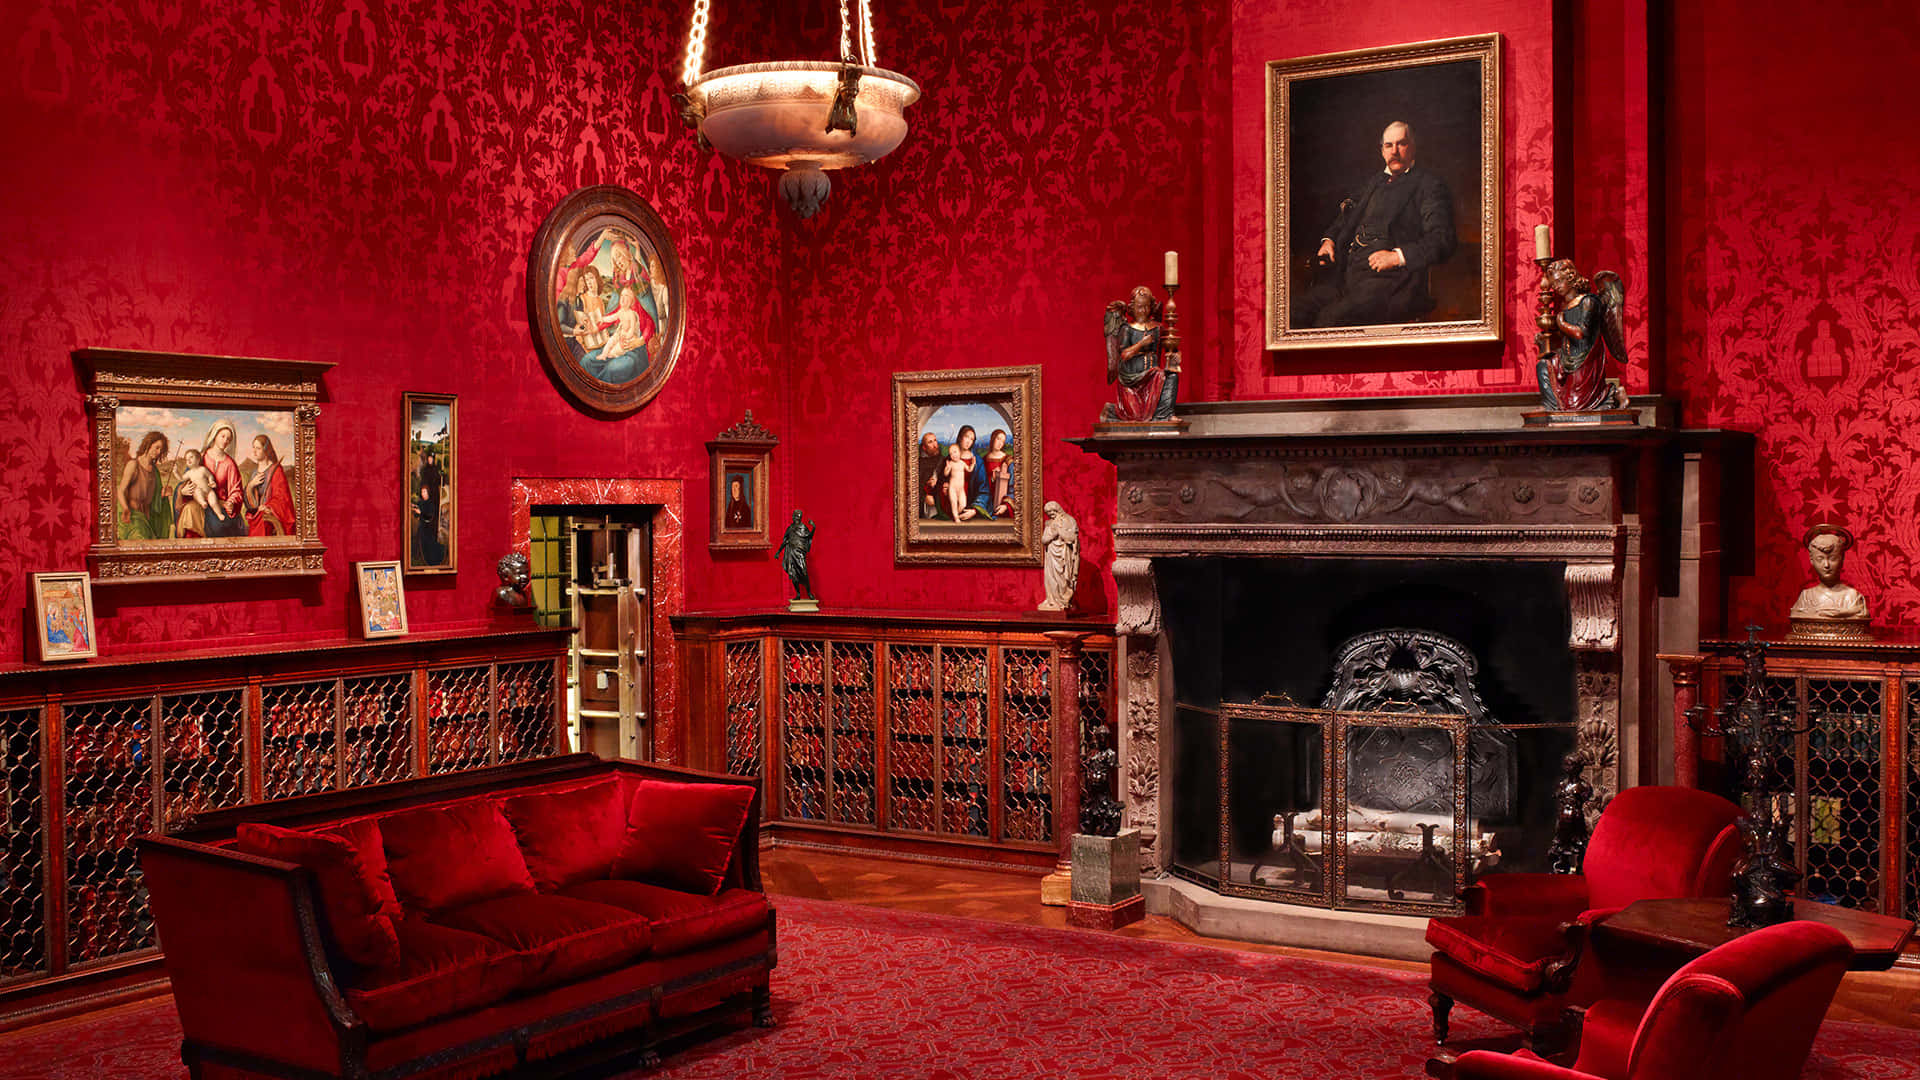 A Red Room With A Fireplace And Red Couches